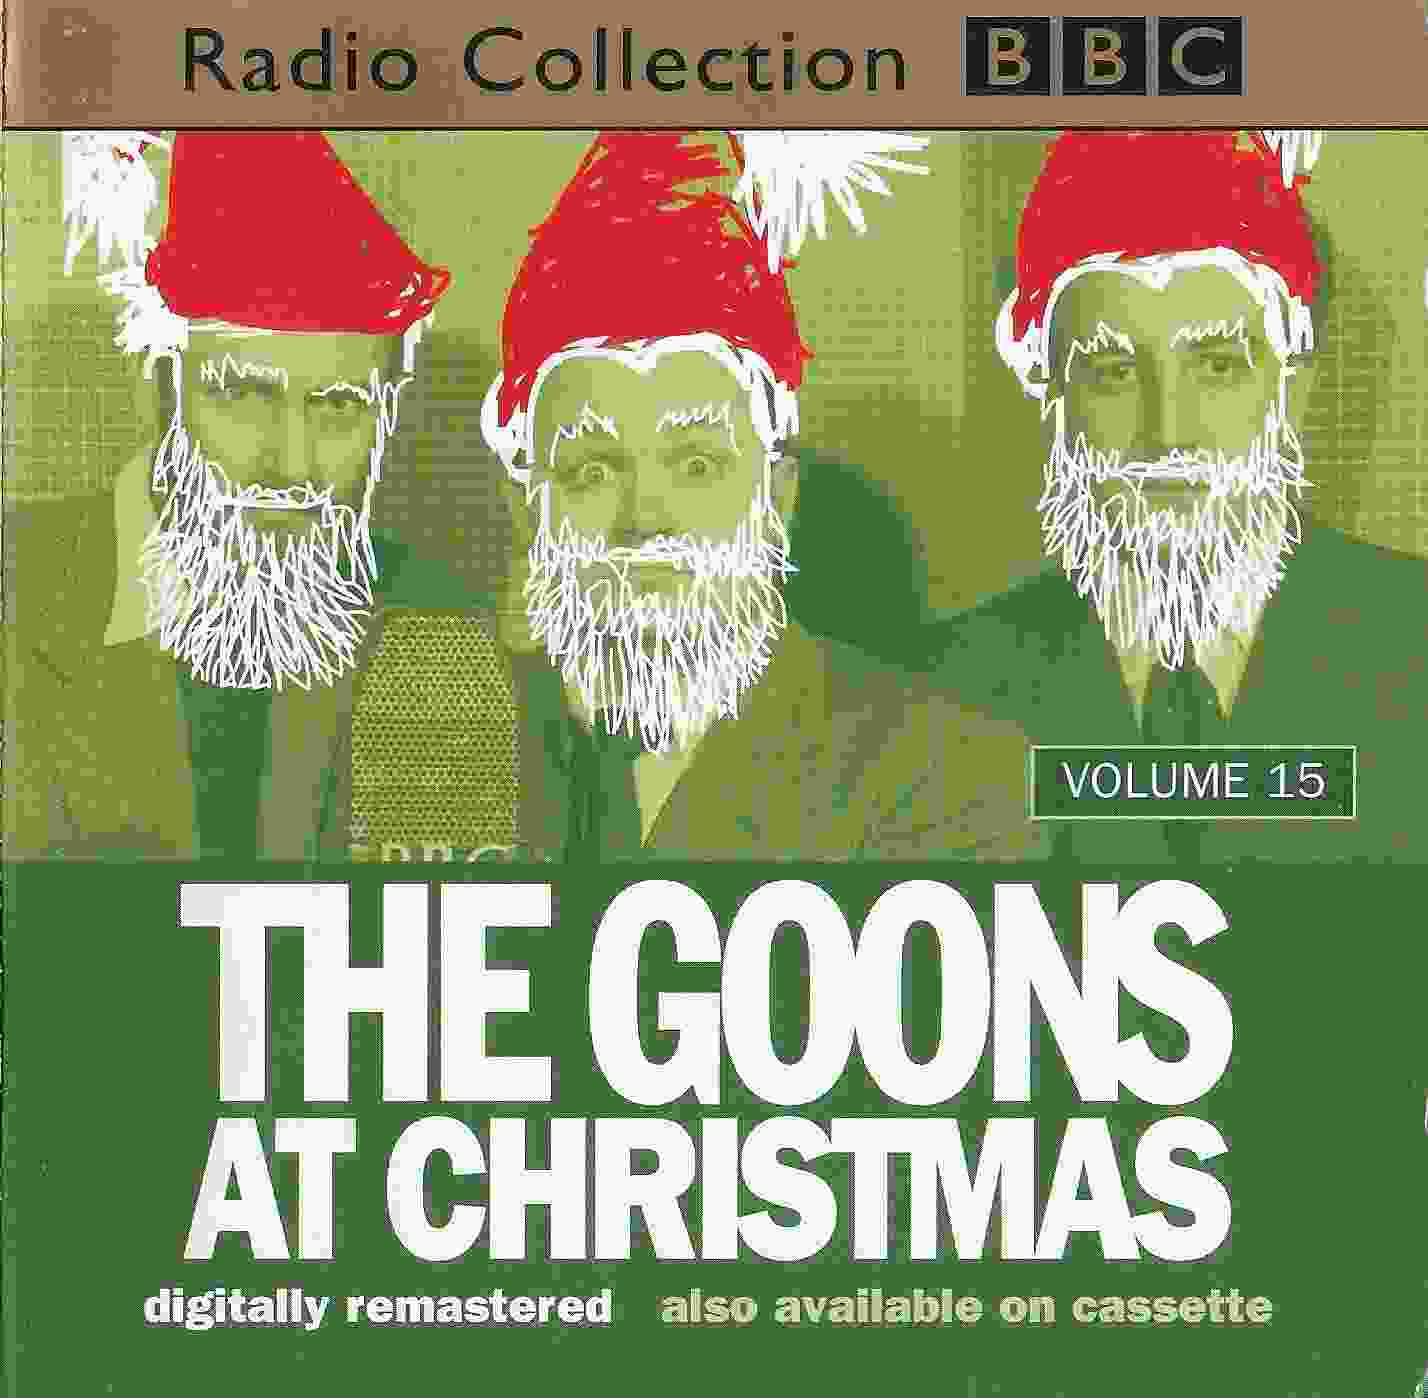 Picture of ZBBC 2194 CD The Goons at Christmas 15 by artist Spike Milligan / Eric Sykes / Larry Stephens from the BBC cds - Records and Tapes library